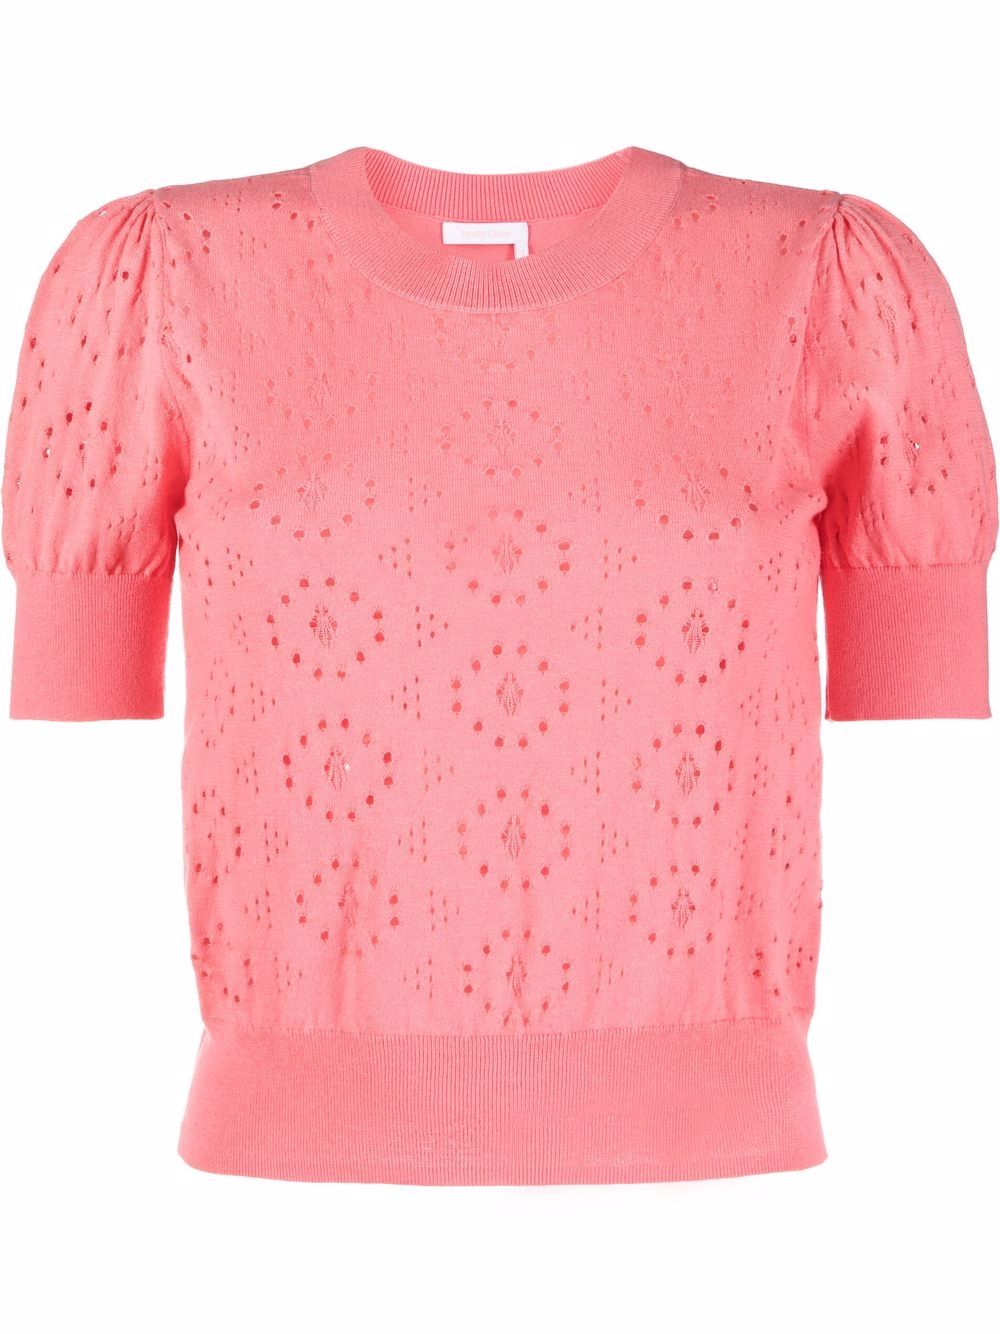 See by Chloé cut-out fine-knit top - Pink von See by Chloé